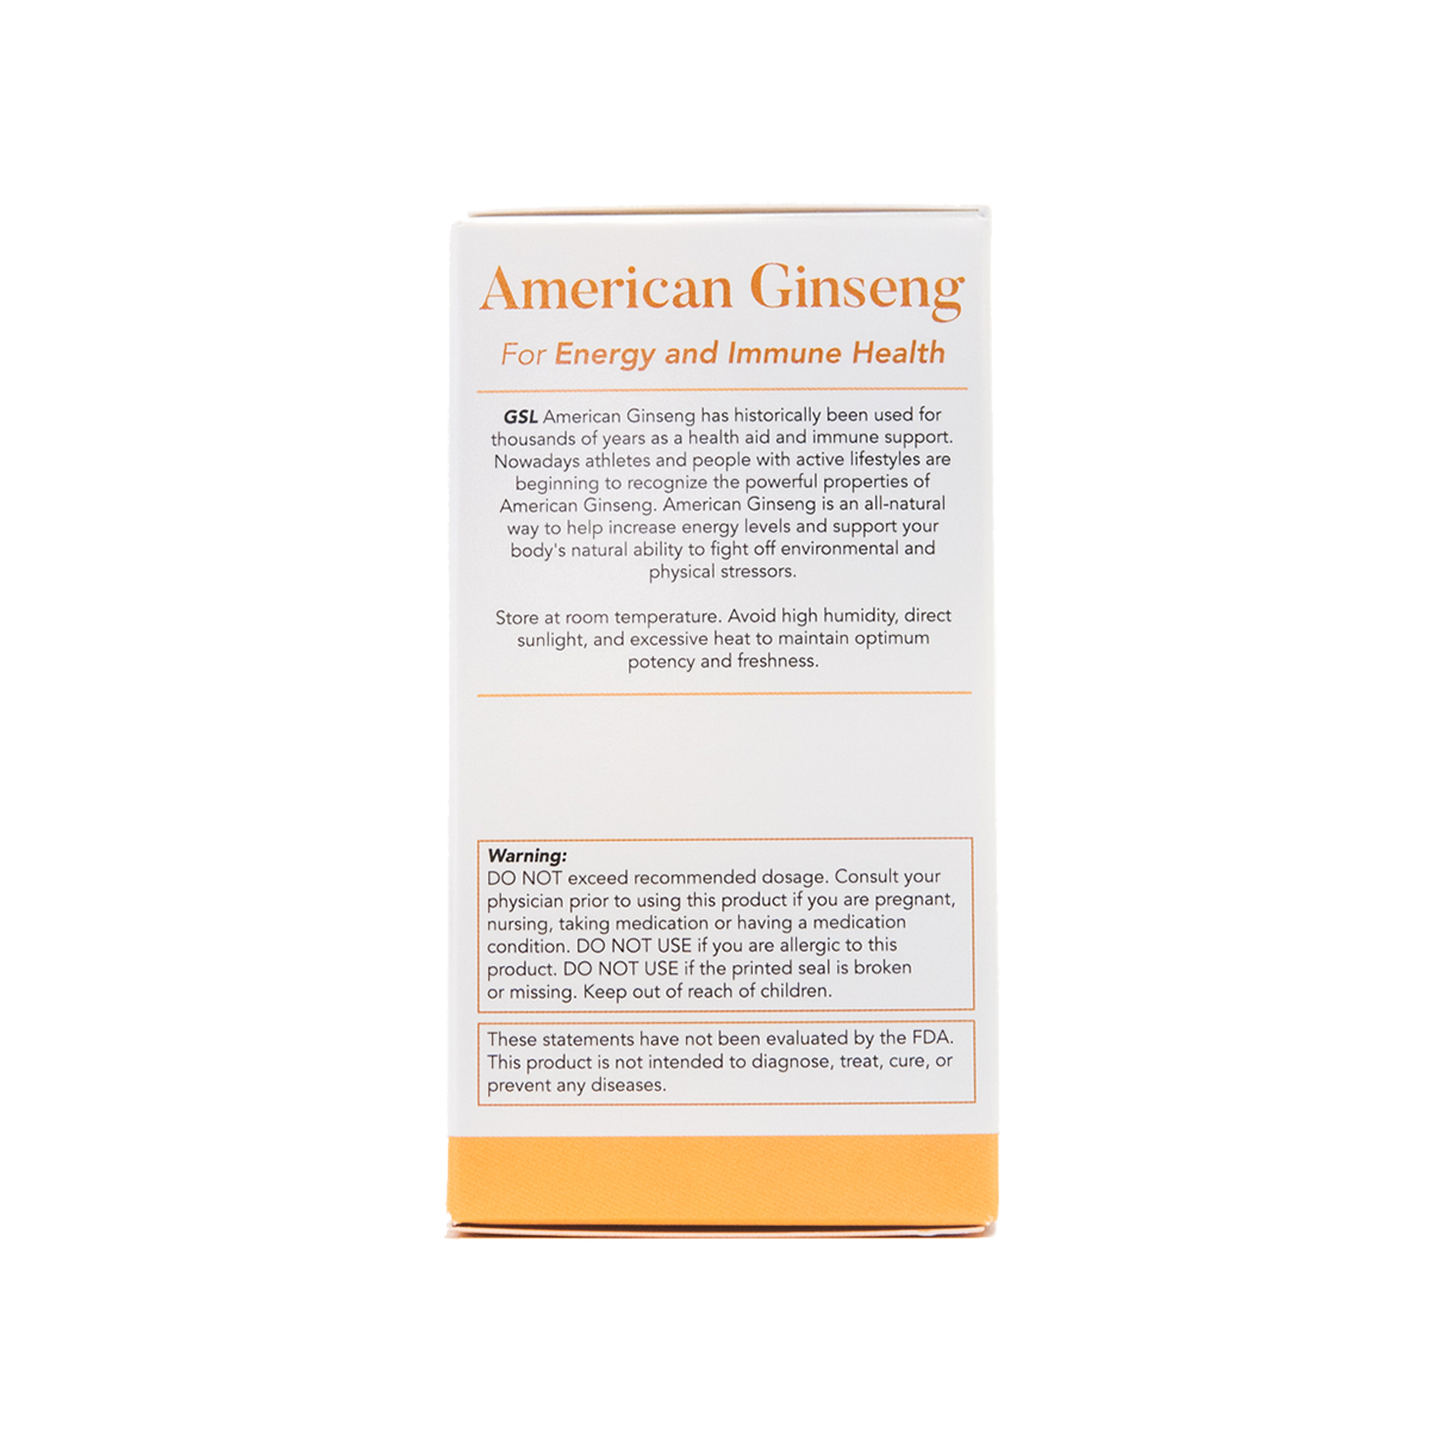 American Ginseng Extract | Extract Standardized to Contain 5% Ginsenosides | For Energy and Immune Health | Made in The USA